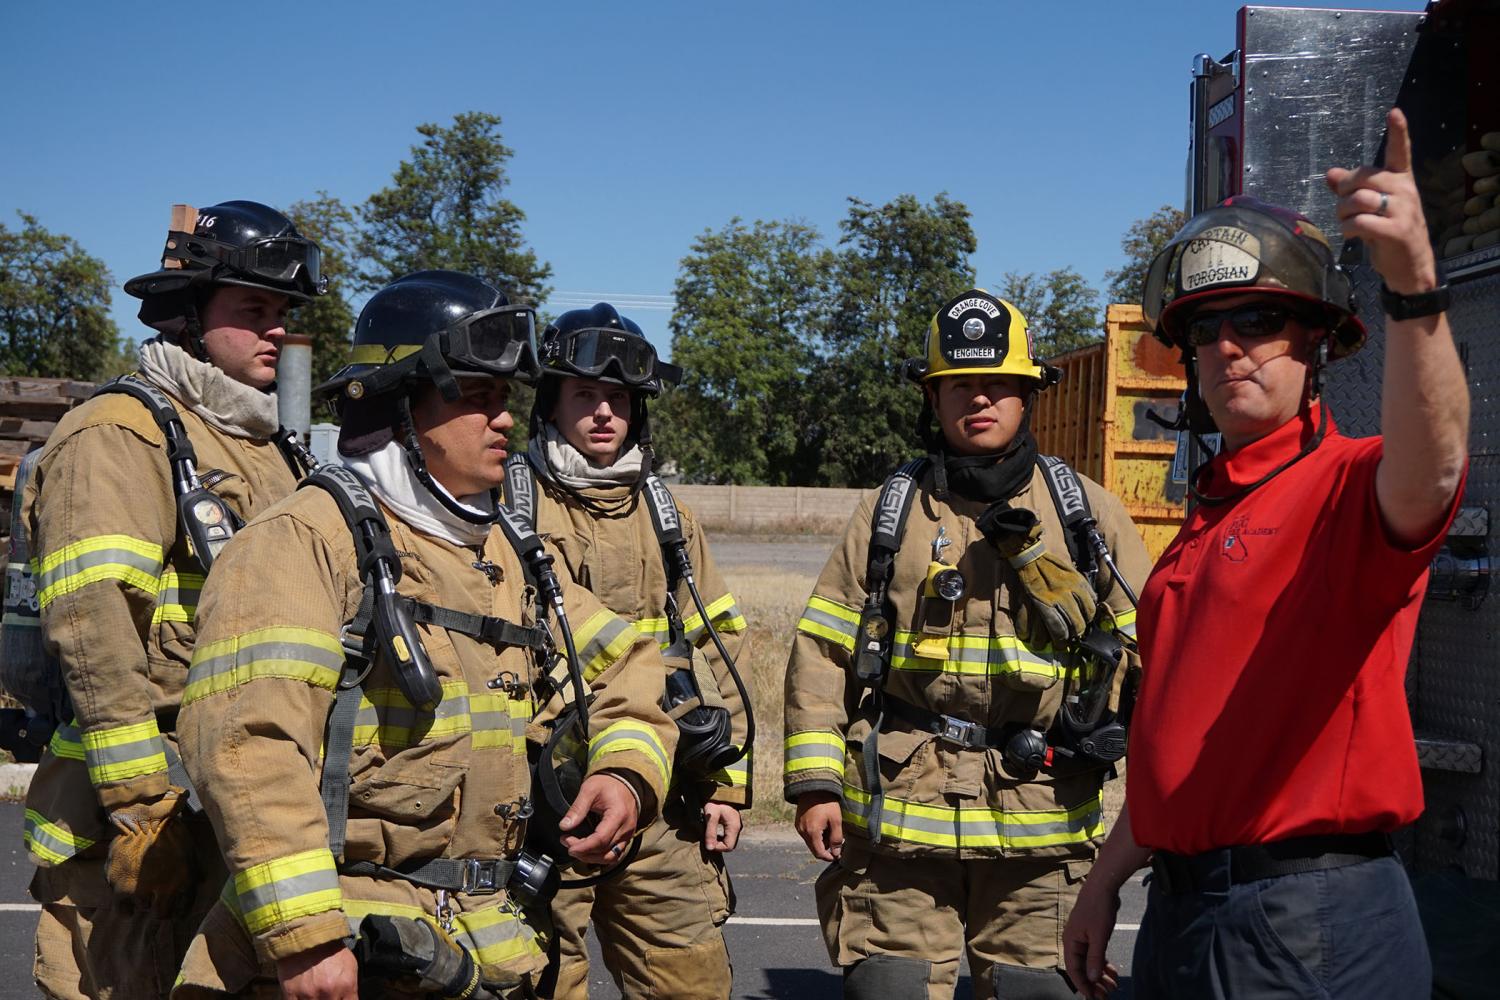 An instructor explains to the Fresno City College Fire Academy students what they need to do to salvage a simulated second story apartment at the Clovis Fire Training Center on Saturday, April 29, 2017